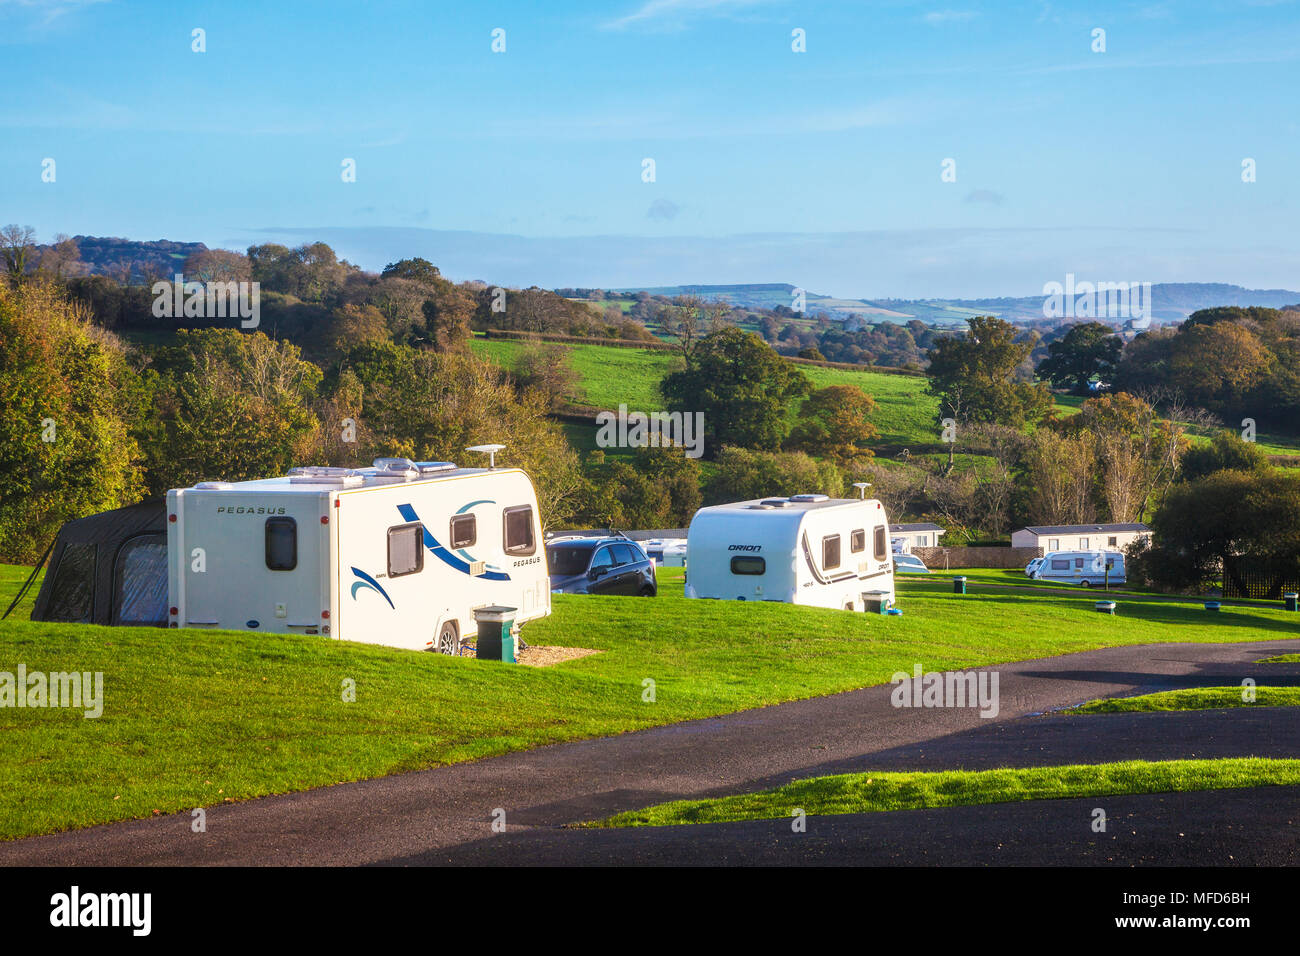 A caravan site with views over the Dorset countryside. Stock Photo